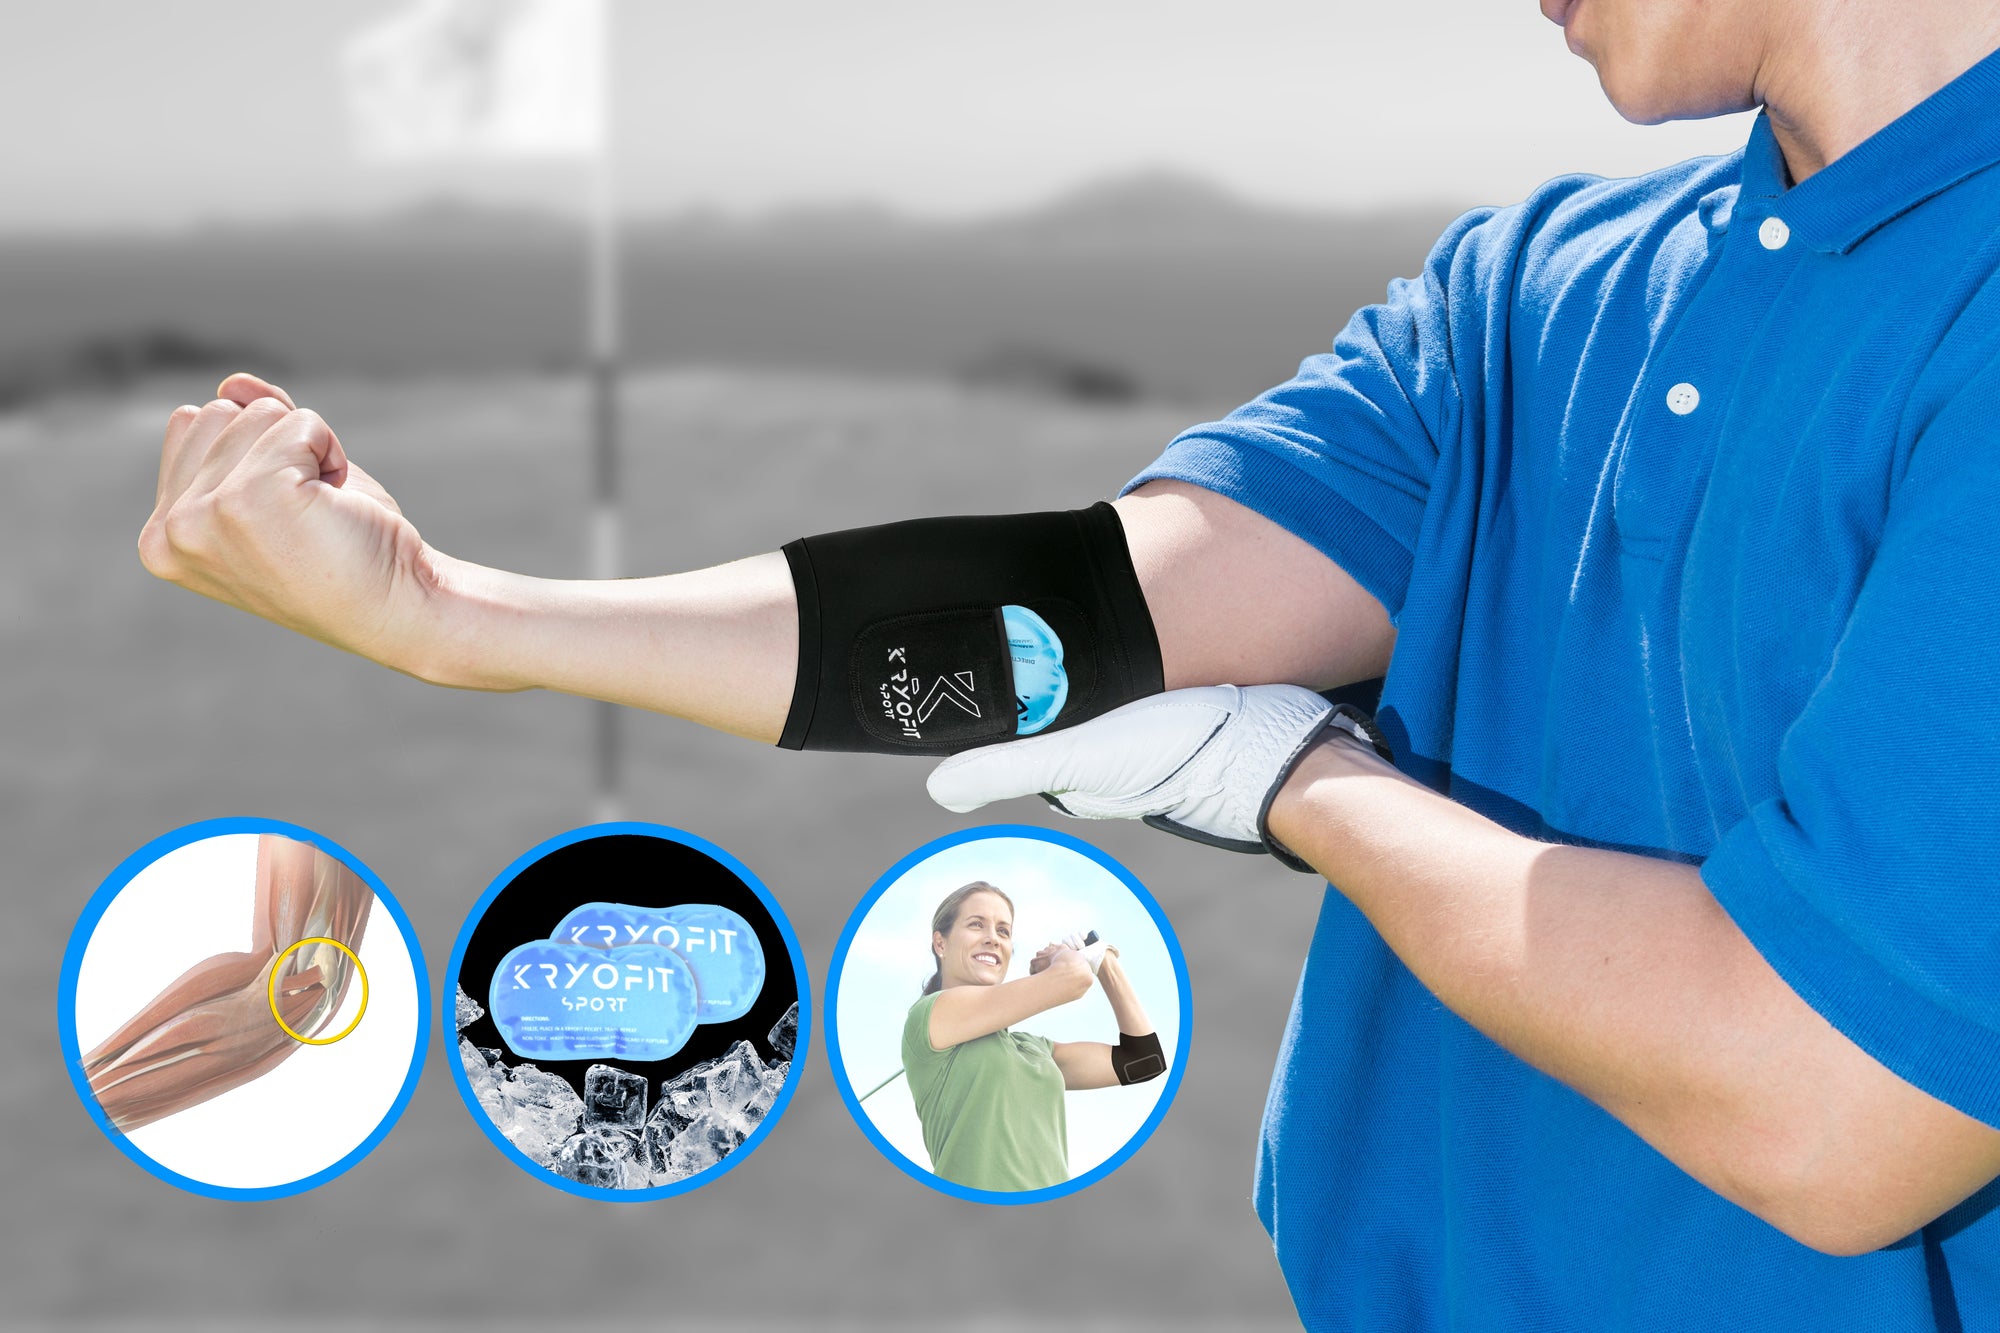 Bicep & Tricep Tendonitis Brace Compression Sleeve - Pain Relief for Bicep  an